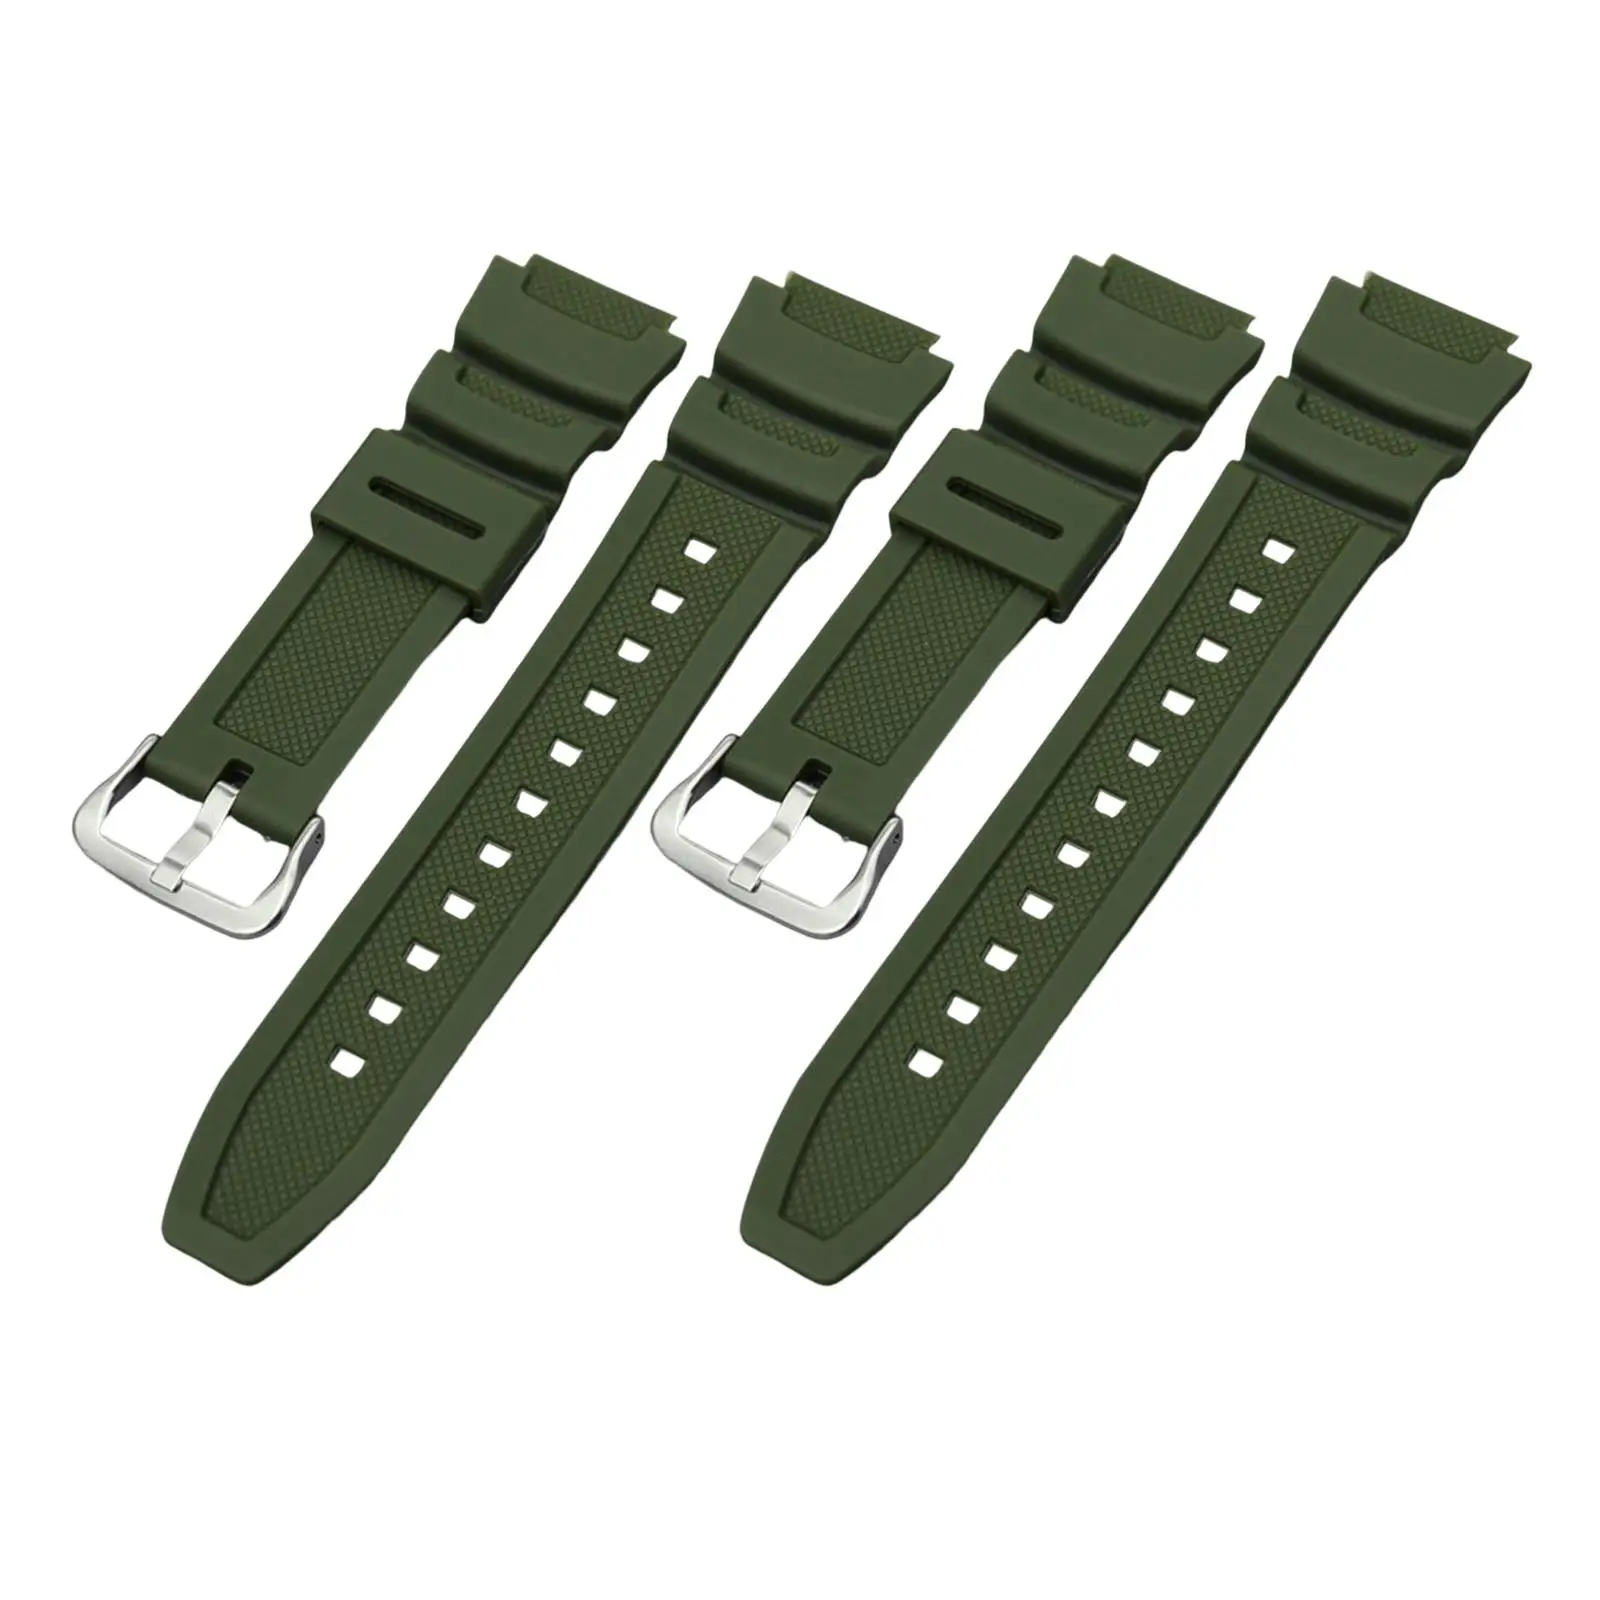 Rubber Wristwatch Band Pin Buckle Watchband 1.8cm Width Watch Band Strap for Sgw-500H Aq-S800W AE-1000W AE-1300 F-108WH